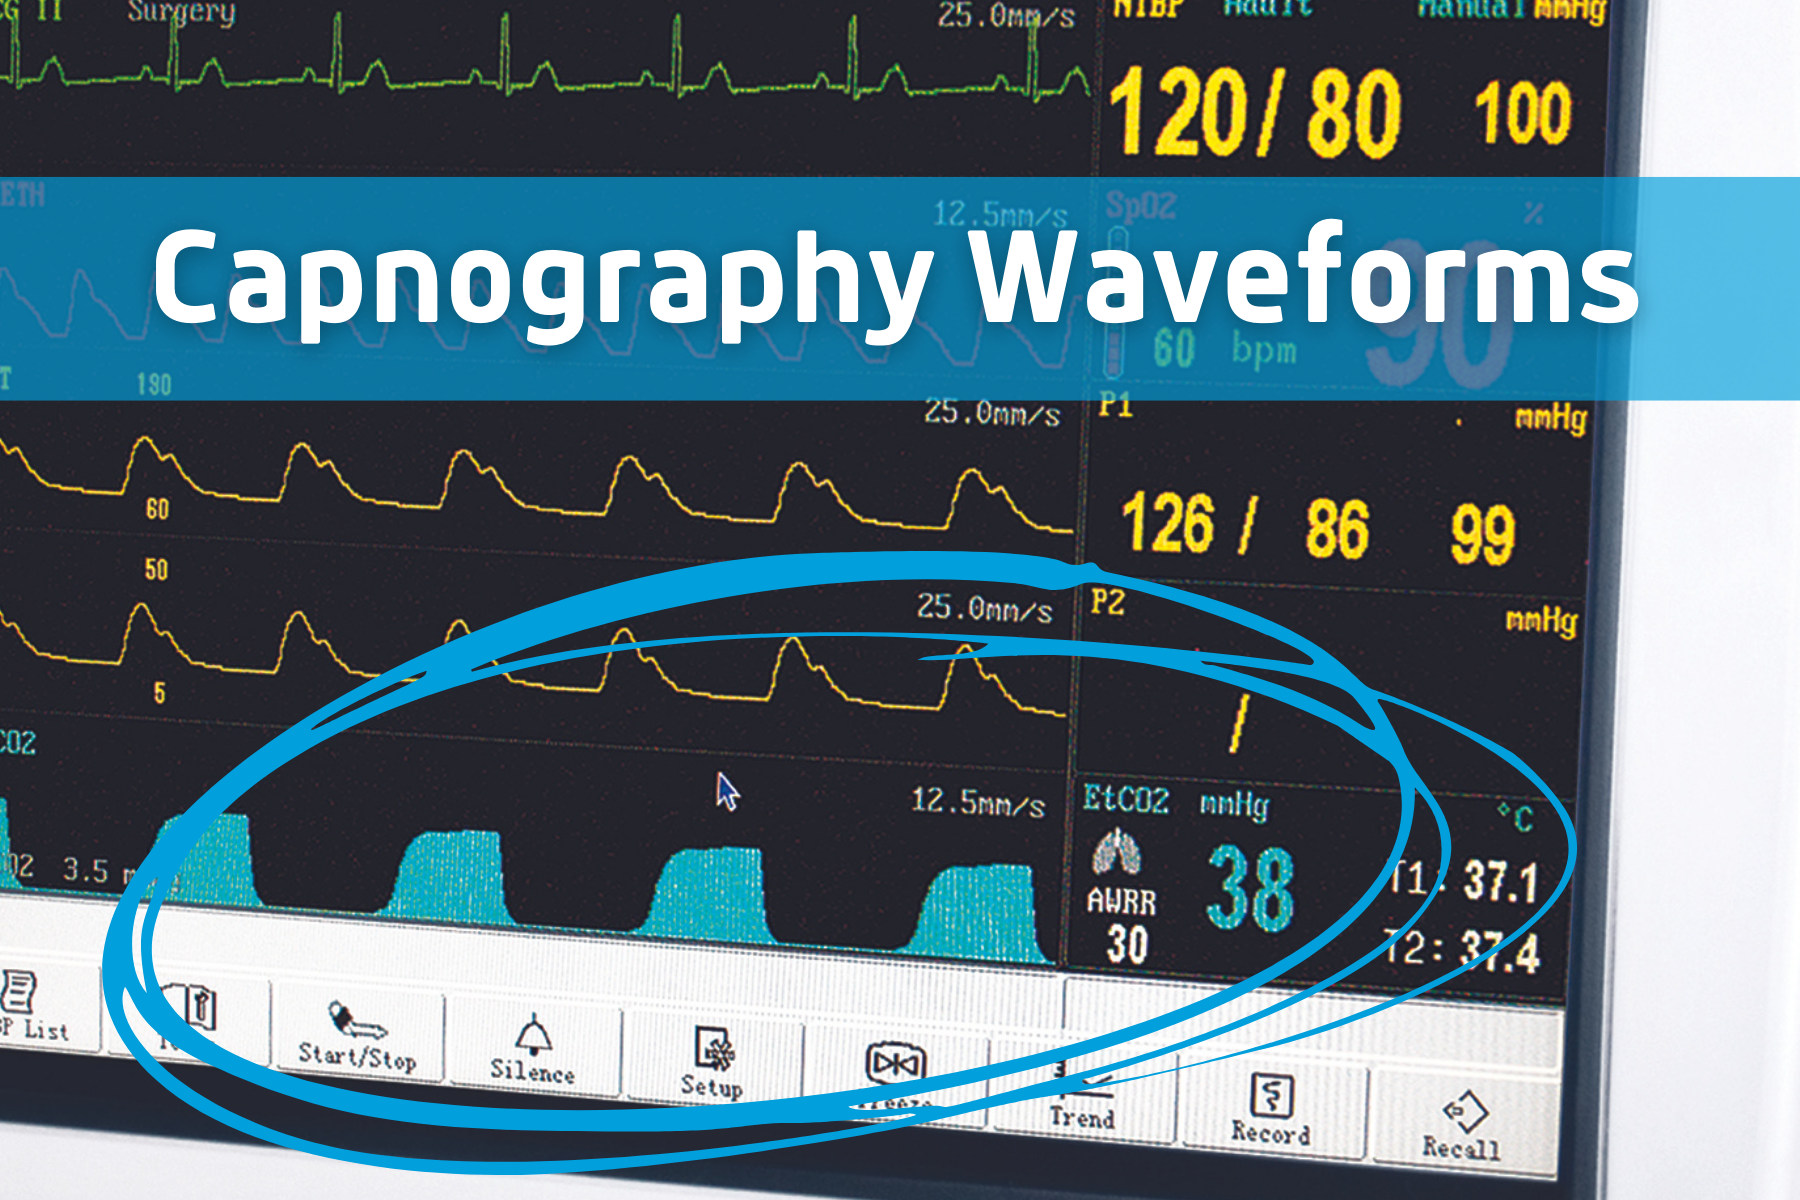 How to Read and Interpret Capnography Waveforms